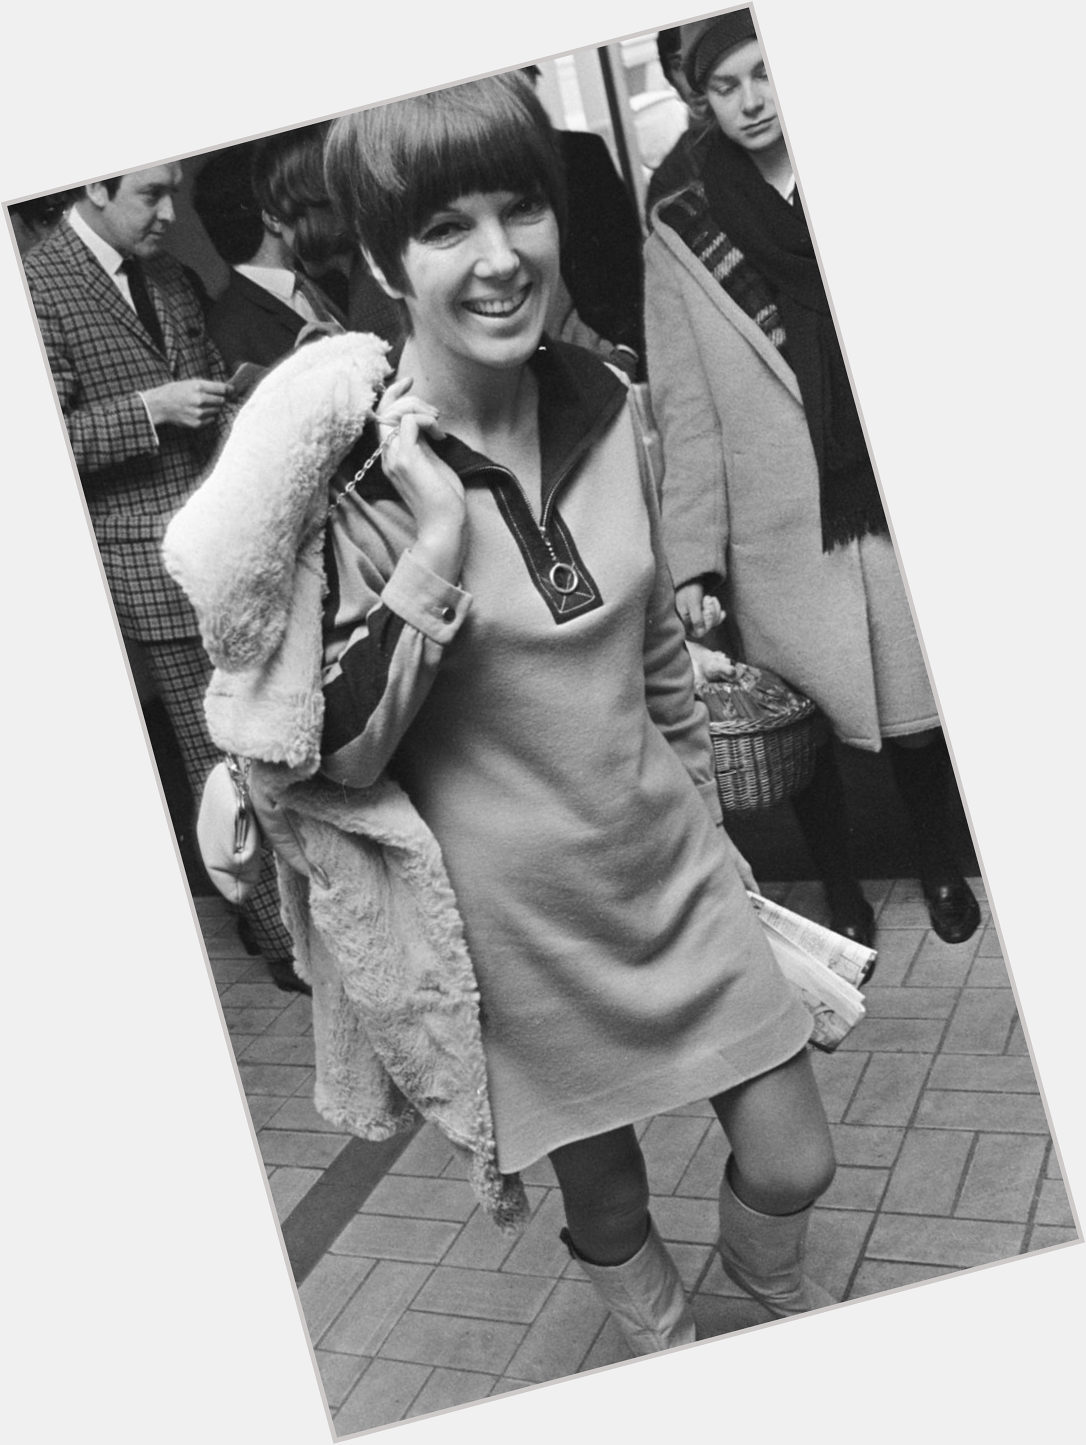 Http://fanpagepress.net/m/M/Mary Quant Marriage 9